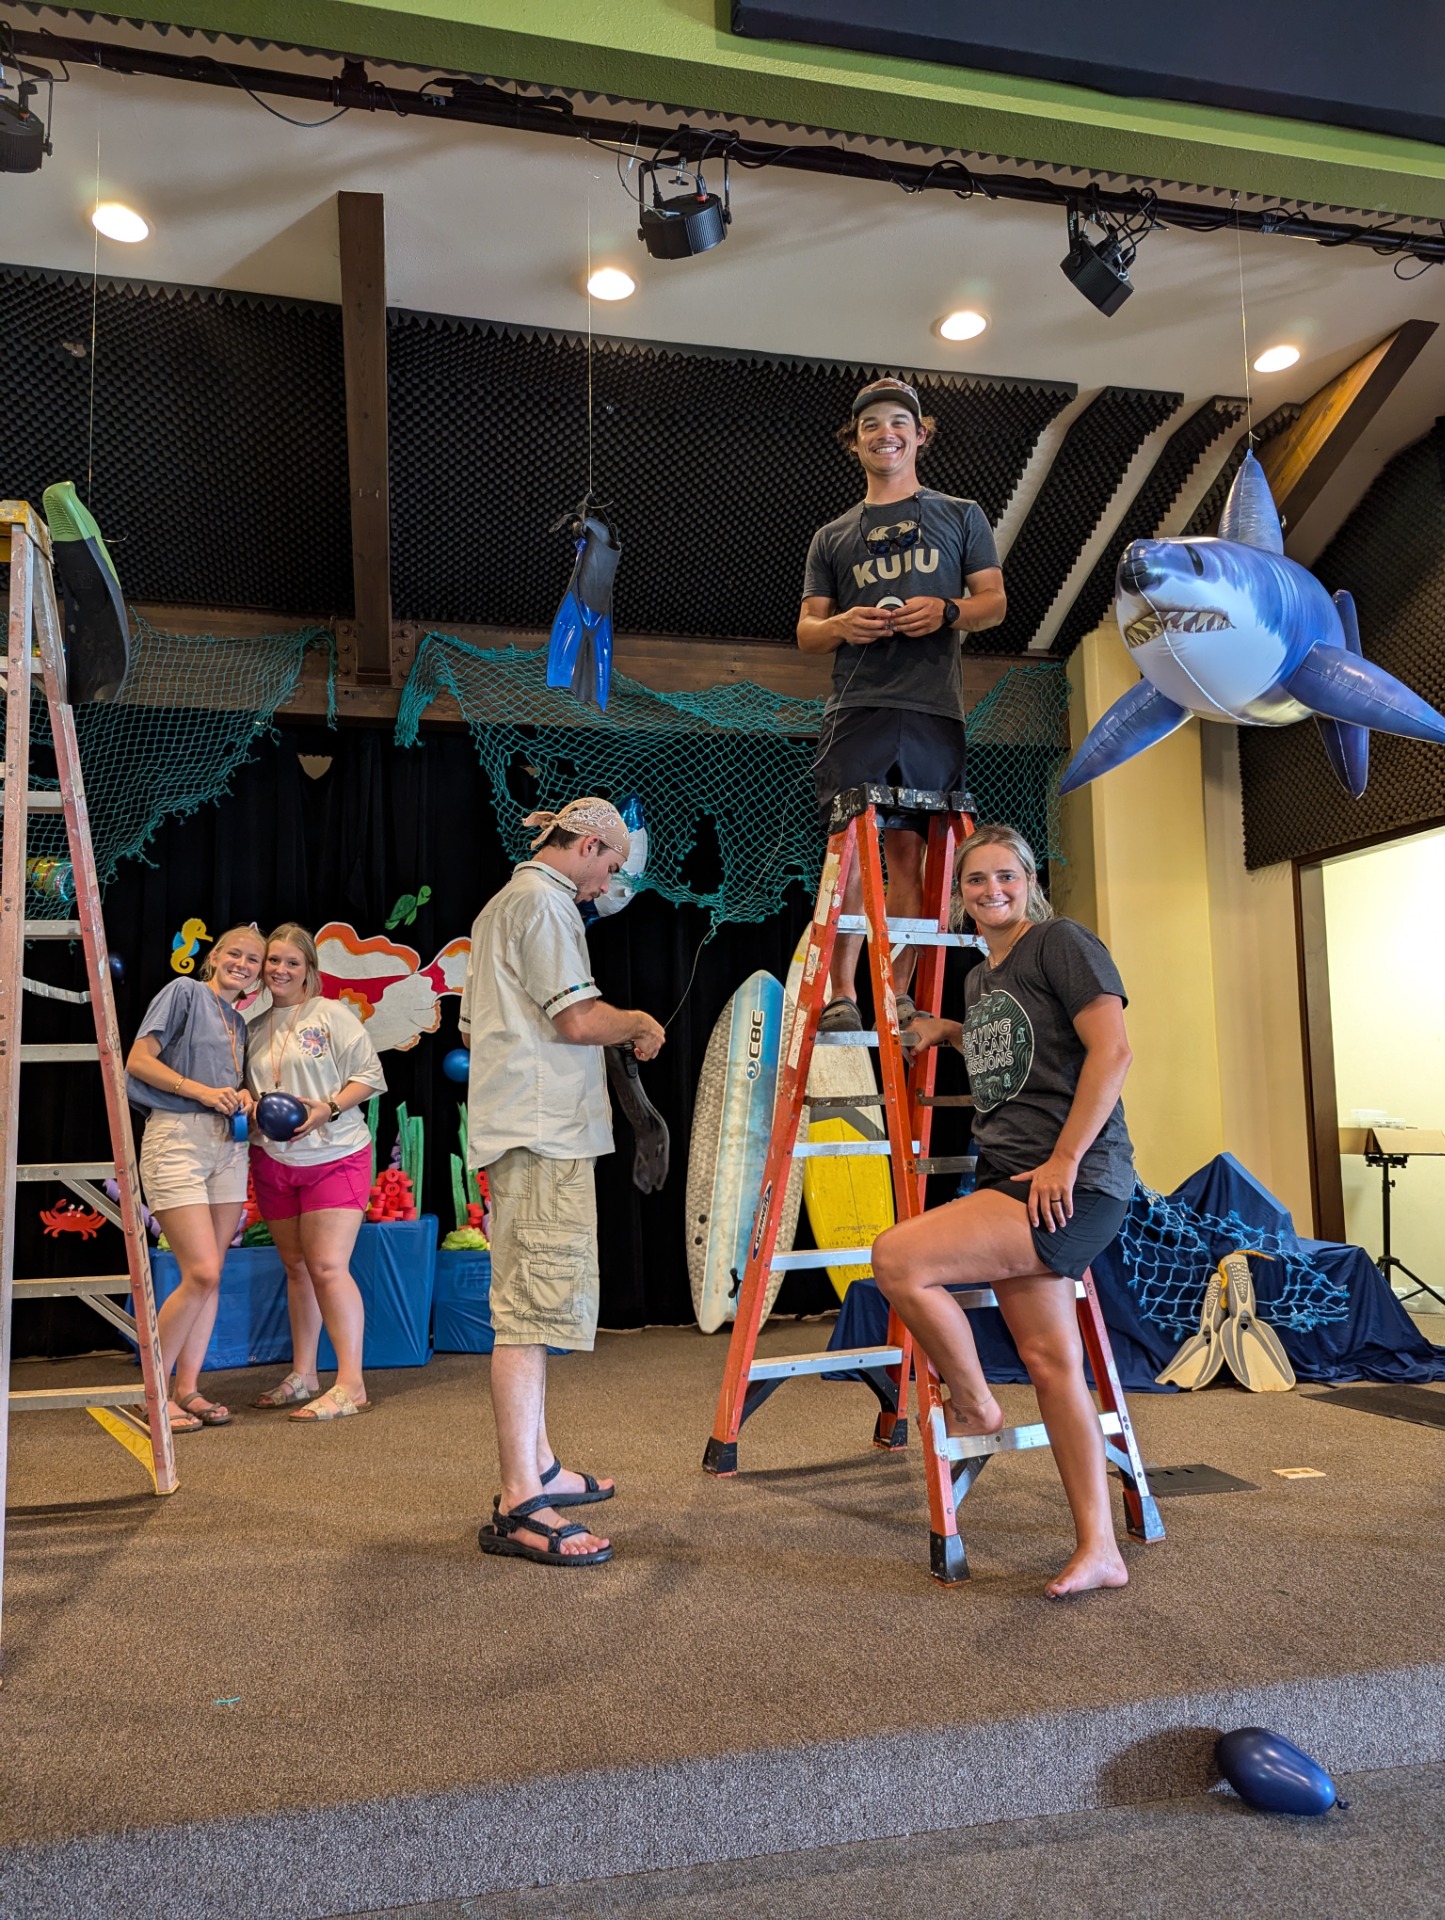 Setting the Stage for VBS